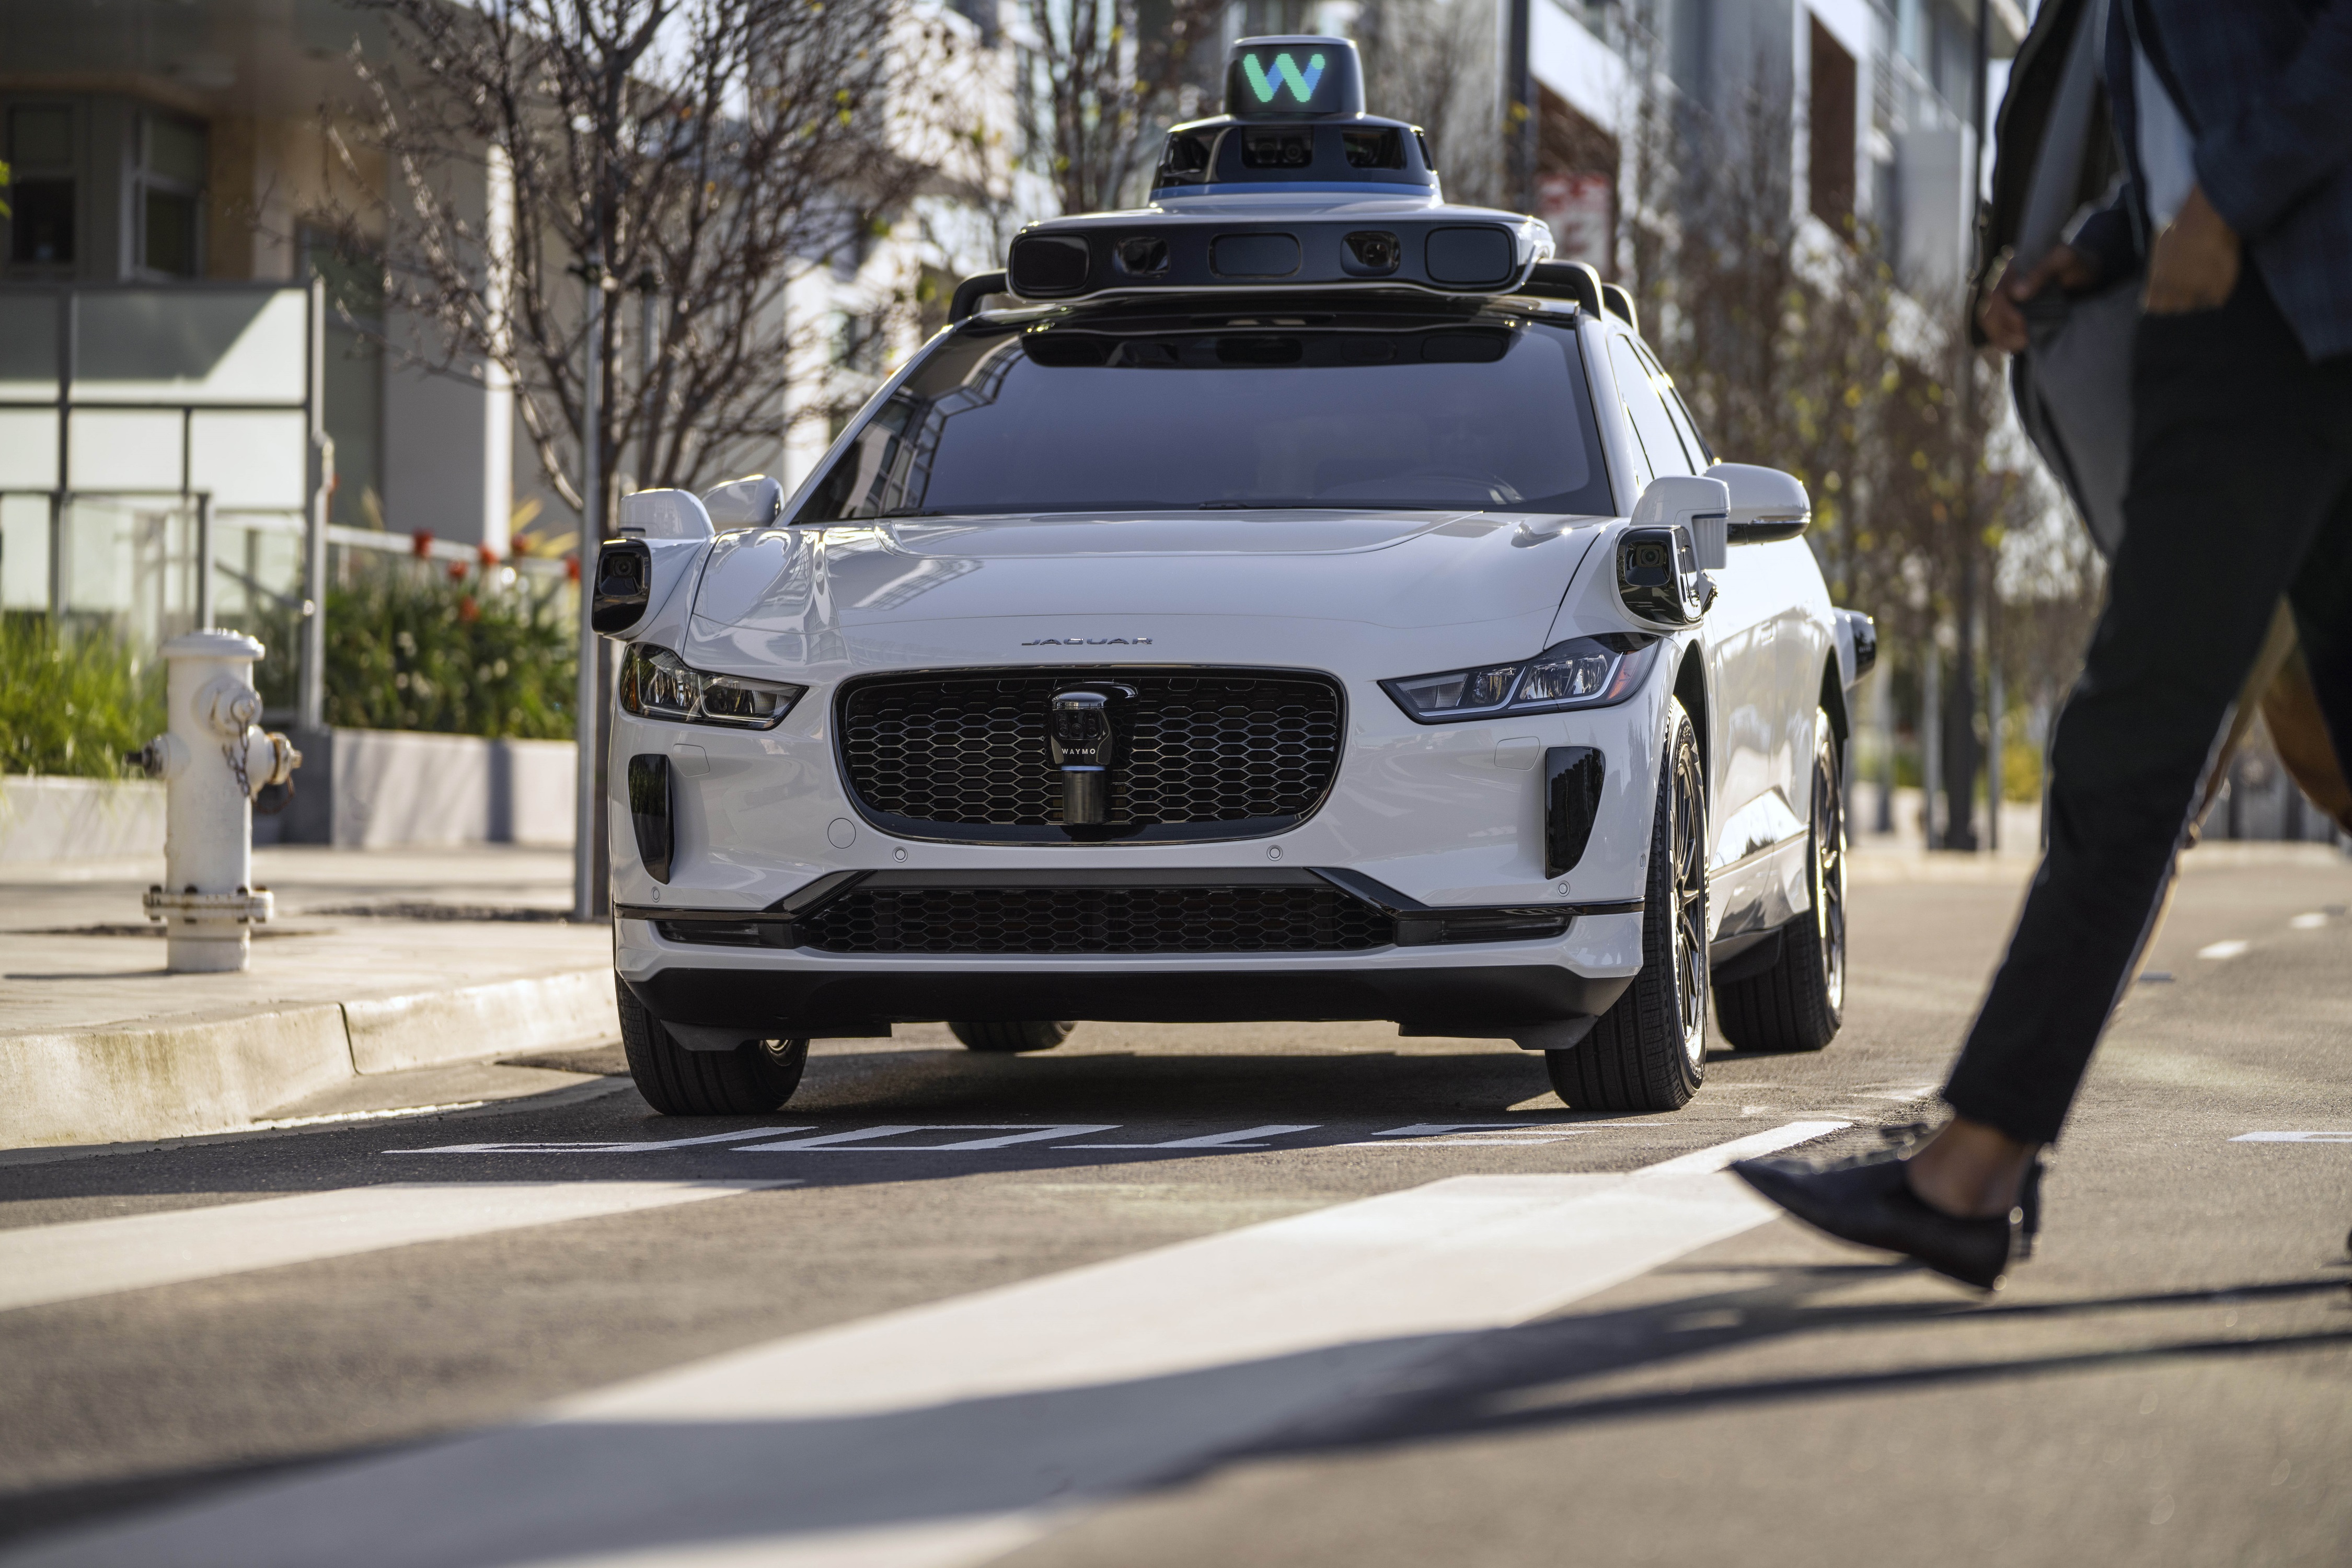 Waymo has released a study proving greater safety for its unmanned cars